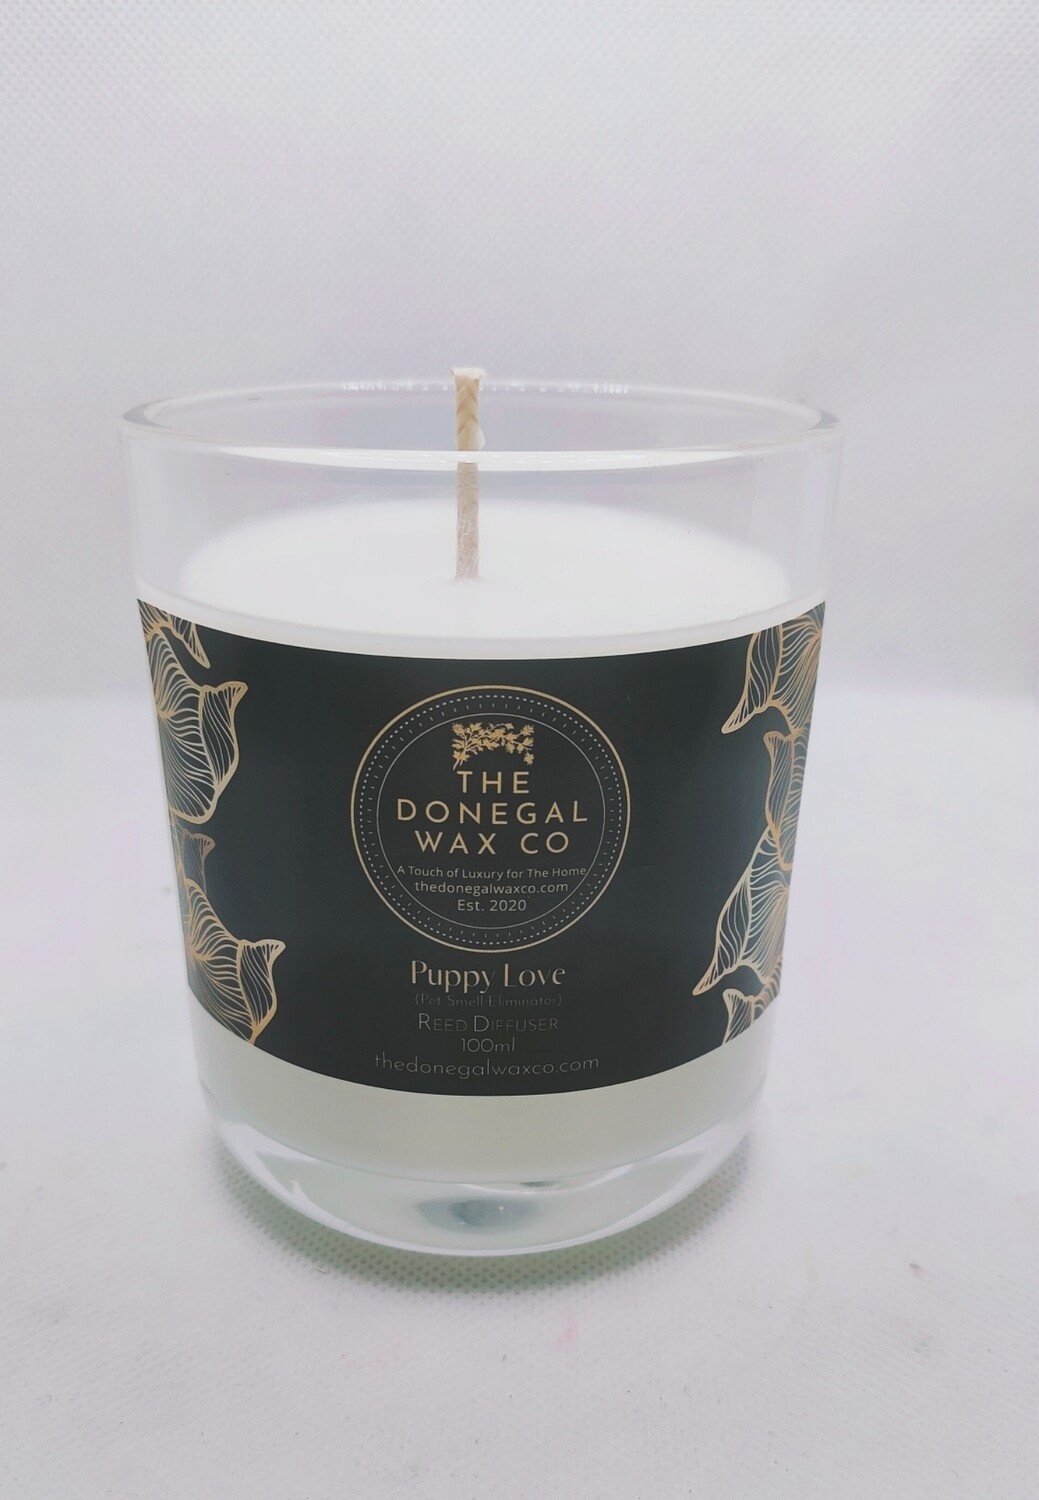 Puppy Love (Pet smell eliminator) Luxury Soy Candle